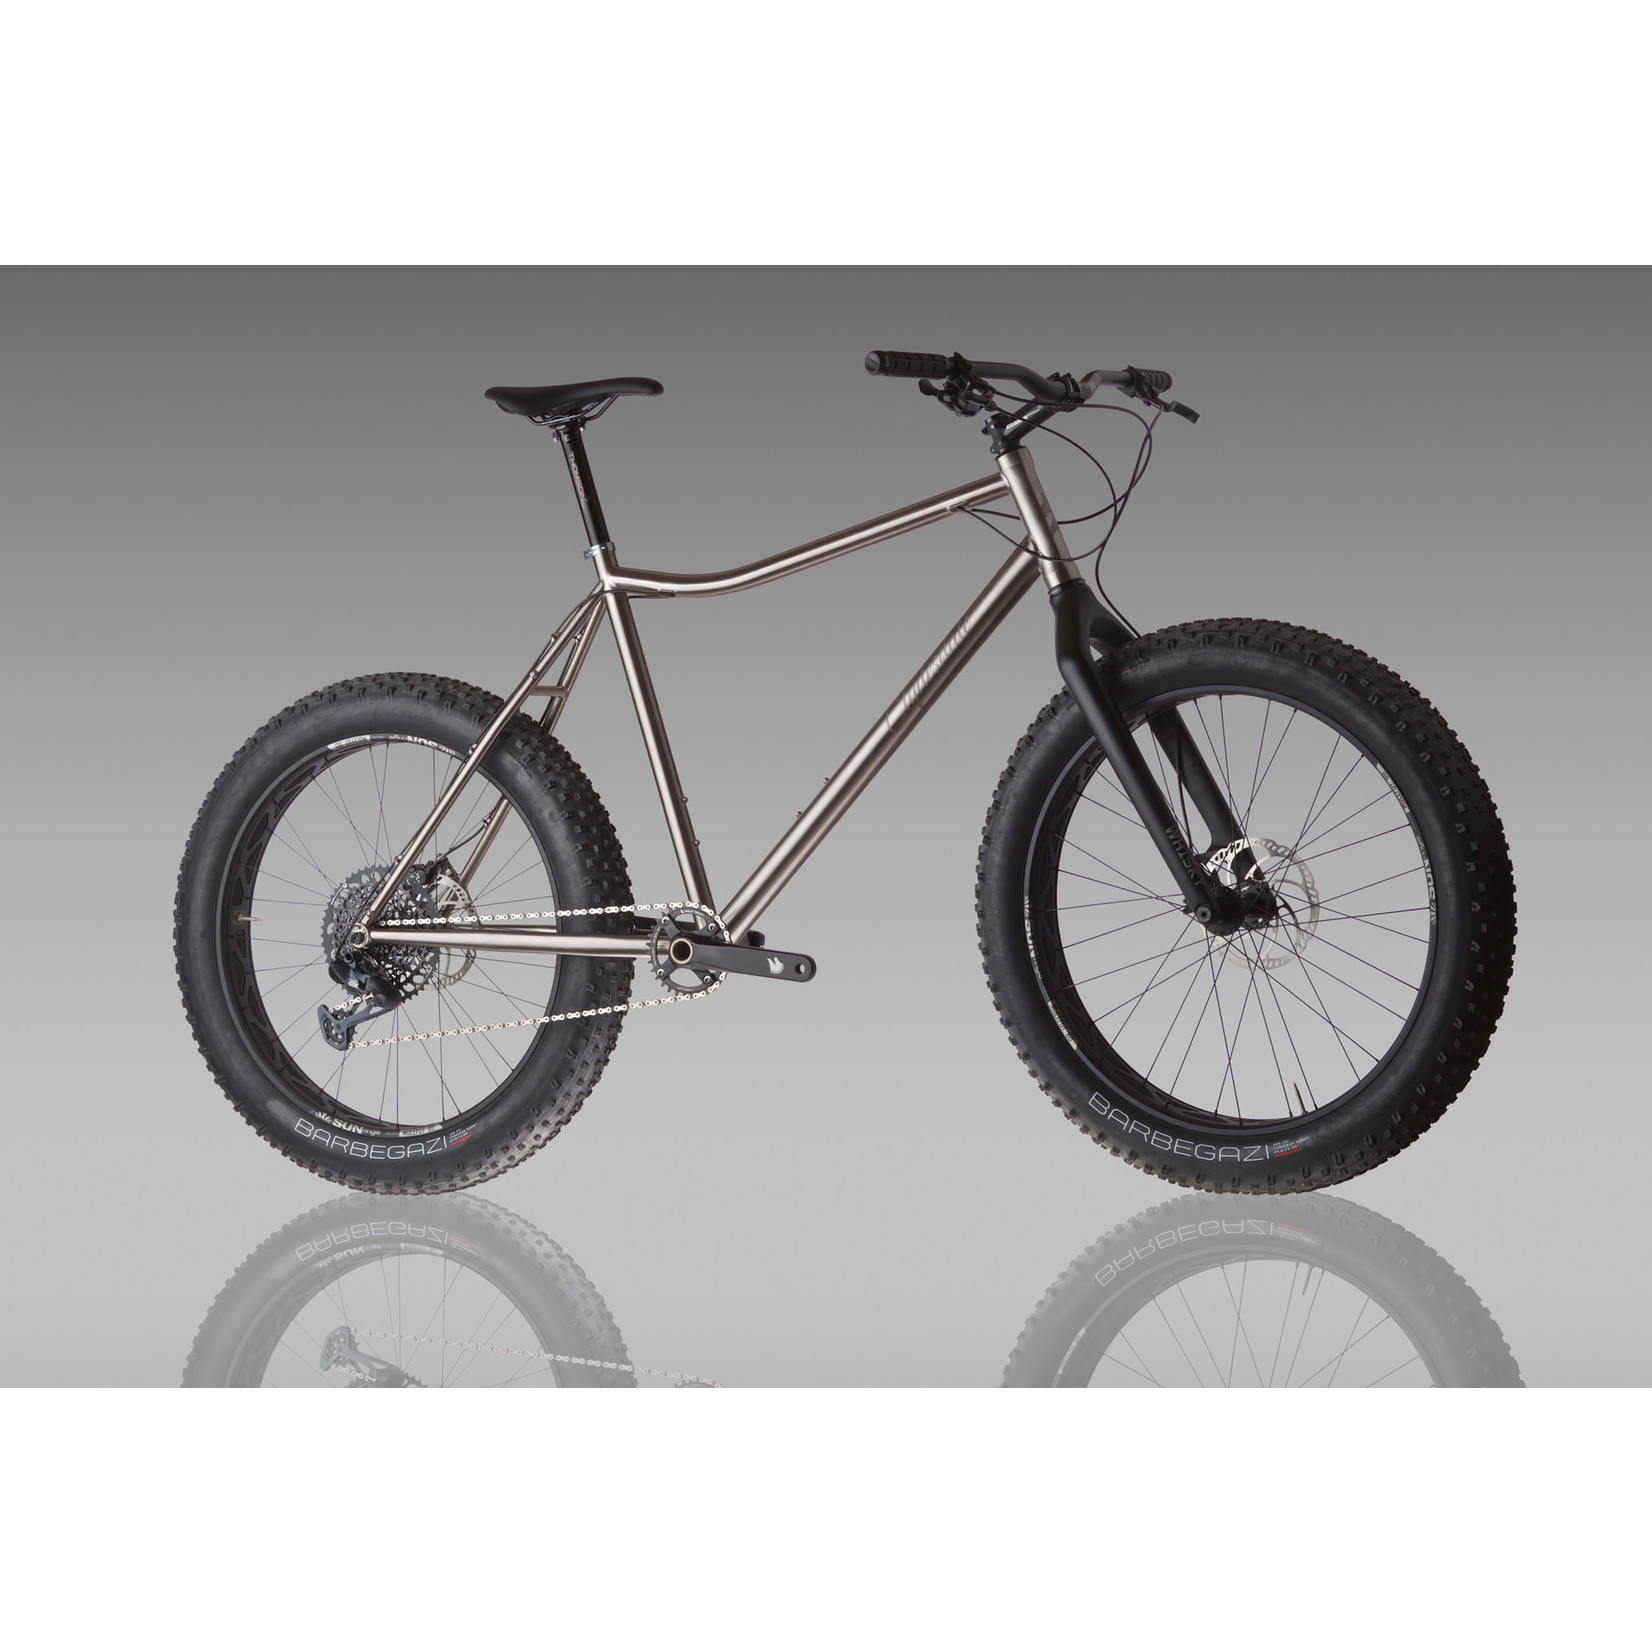 Clydesdale Clydesdale Fat Bike Frame